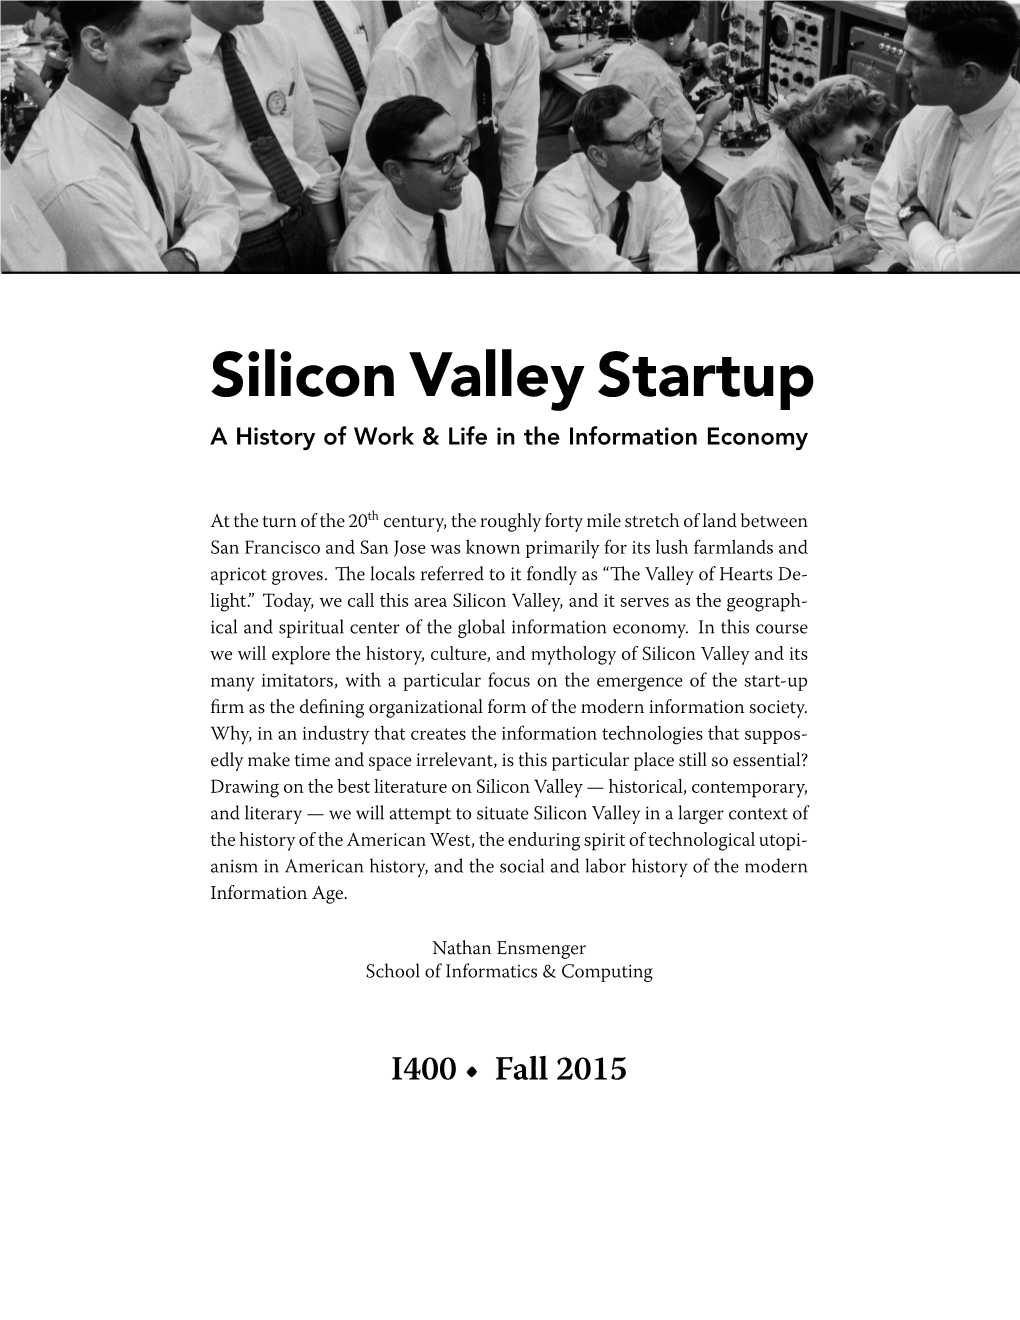 Silicon Valley Startup a History of Work & Life in the Information Economy